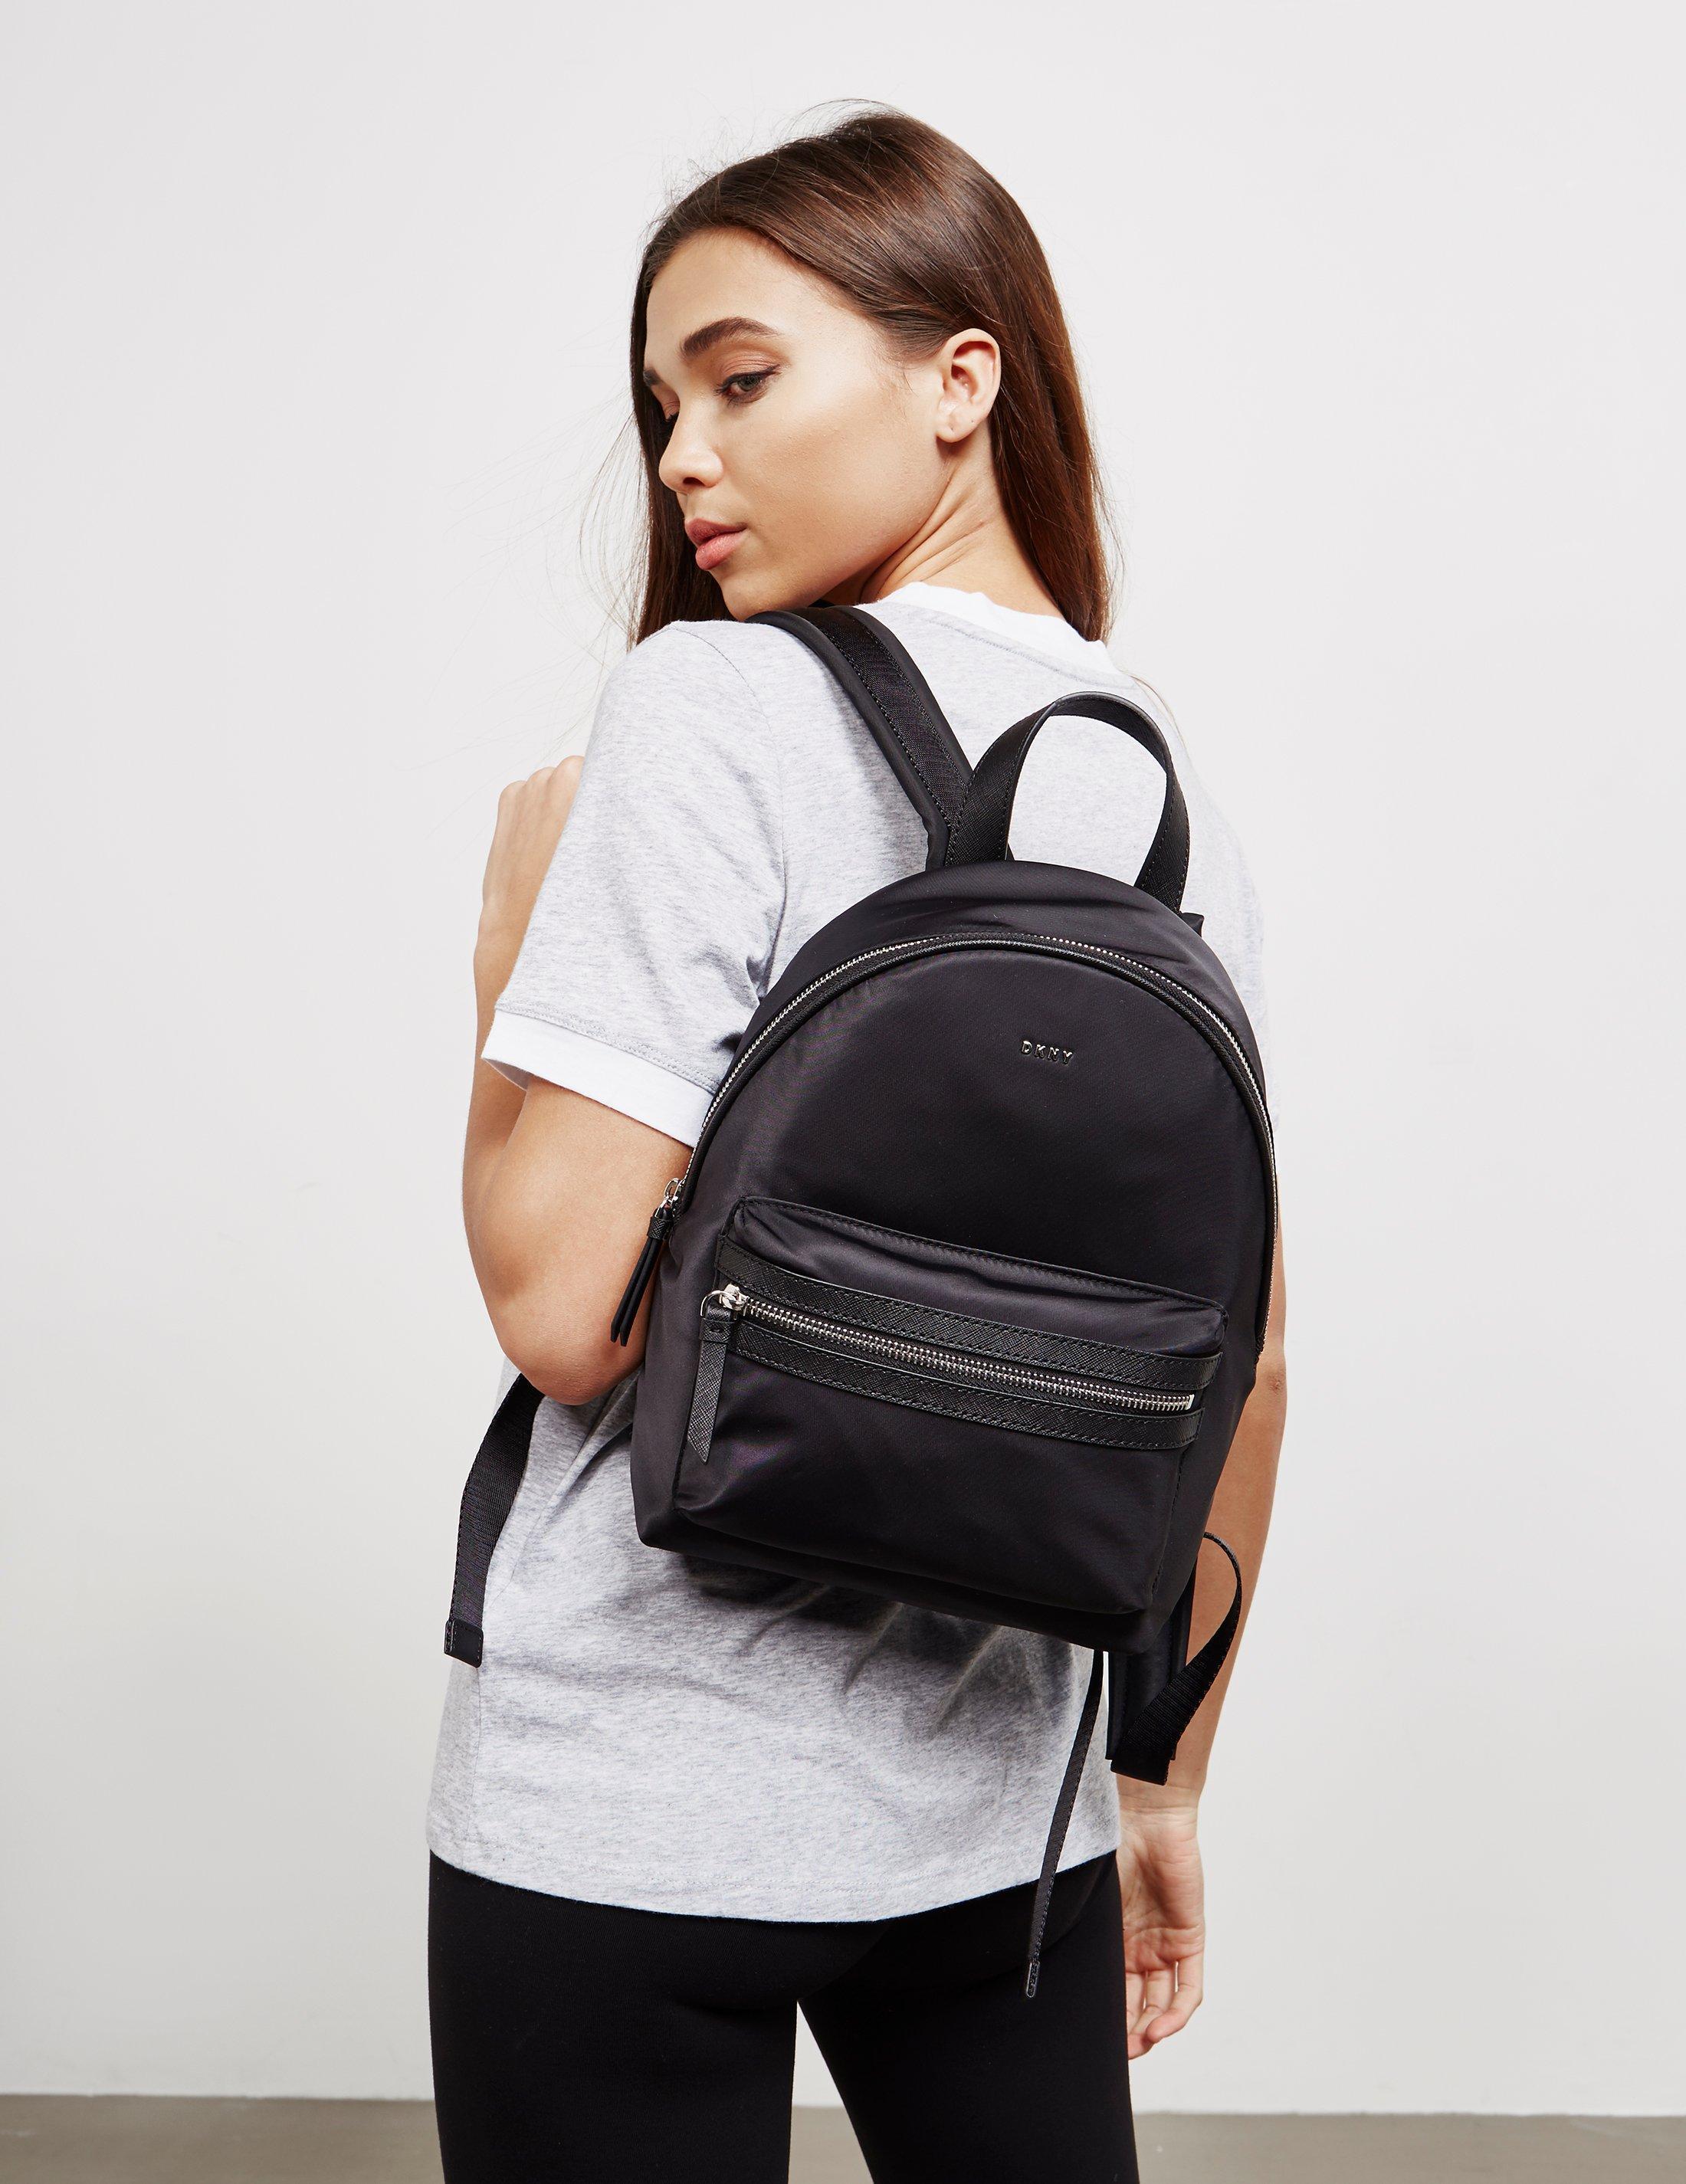 DKNY Synthetic Casey Medium Backpack in Black - Save 48% - Lyst